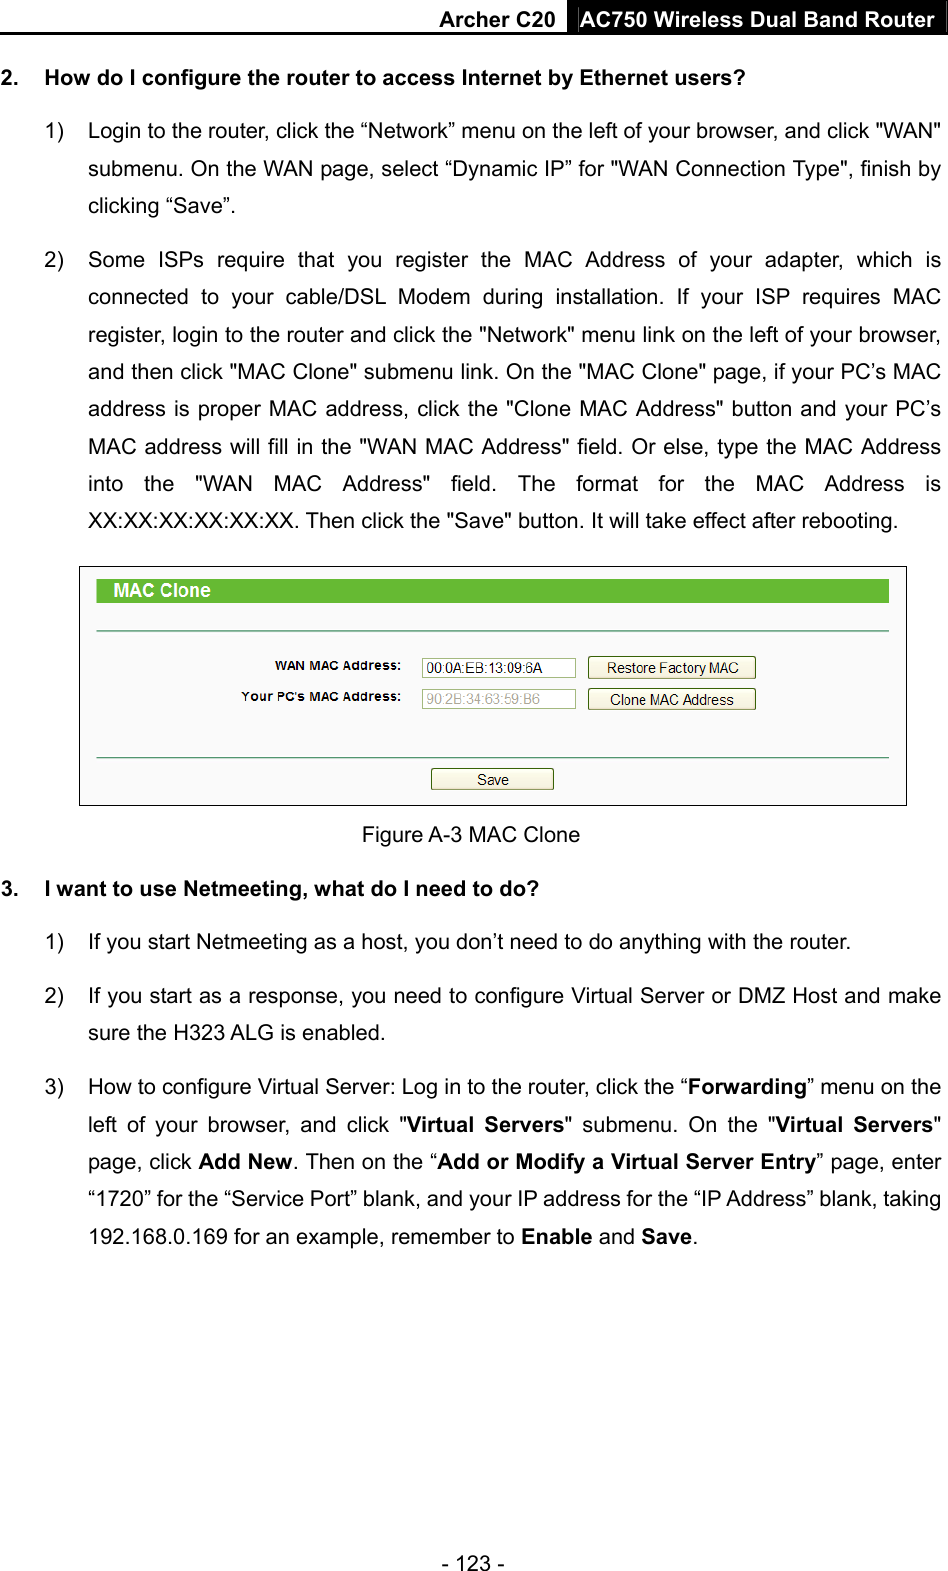 Archer C20 AC750 Wireless Dual Band Router - 123 - 2.  How do I configure the router to access Internet by Ethernet users? 1)  Login to the router, click the “Network” menu on the left of your browser, and click &quot;WAN&quot; submenu. On the WAN page, select “Dynamic IP” for &quot;WAN Connection Type&quot;, finish by clicking “Save”. 2)  Some ISPs require that you register the MAC Address of your adapter, which is connected to your cable/DSL Modem during installation. If your ISP requires MAC register, login to the router and click the &quot;Network&quot; menu link on the left of your browser, and then click &quot;MAC Clone&quot; submenu link. On the &quot;MAC Clone&quot; page, if your PC’s MAC address is proper MAC address, click the &quot;Clone MAC Address&quot; button and your PC’s MAC address will fill in the &quot;WAN MAC Address&quot; field. Or else, type the MAC Address into the &quot;WAN MAC Address&quot; field. The format for the MAC Address is XX:XX:XX:XX:XX:XX. Then click the &quot;Save&quot; button. It will take effect after rebooting.  Figure A-3 MAC Clone 3.  I want to use Netmeeting, what do I need to do? 1)  If you start Netmeeting as a host, you don’t need to do anything with the router. 2)  If you start as a response, you need to configure Virtual Server or DMZ Host and make sure the H323 ALG is enabled. 3)  How to configure Virtual Server: Log in to the router, click the “Forwarding” menu on the left of your browser, and click &quot;Virtual Servers&quot; submenu. On the &quot;Virtual Servers&quot; page, click Add New. Then on the “Add or Modify a Virtual Server Entry” page, enter “1720” for the “Service Port” blank, and your IP address for the “IP Address” blank, taking 192.168.0.169 for an example, remember to Enable and Save.  